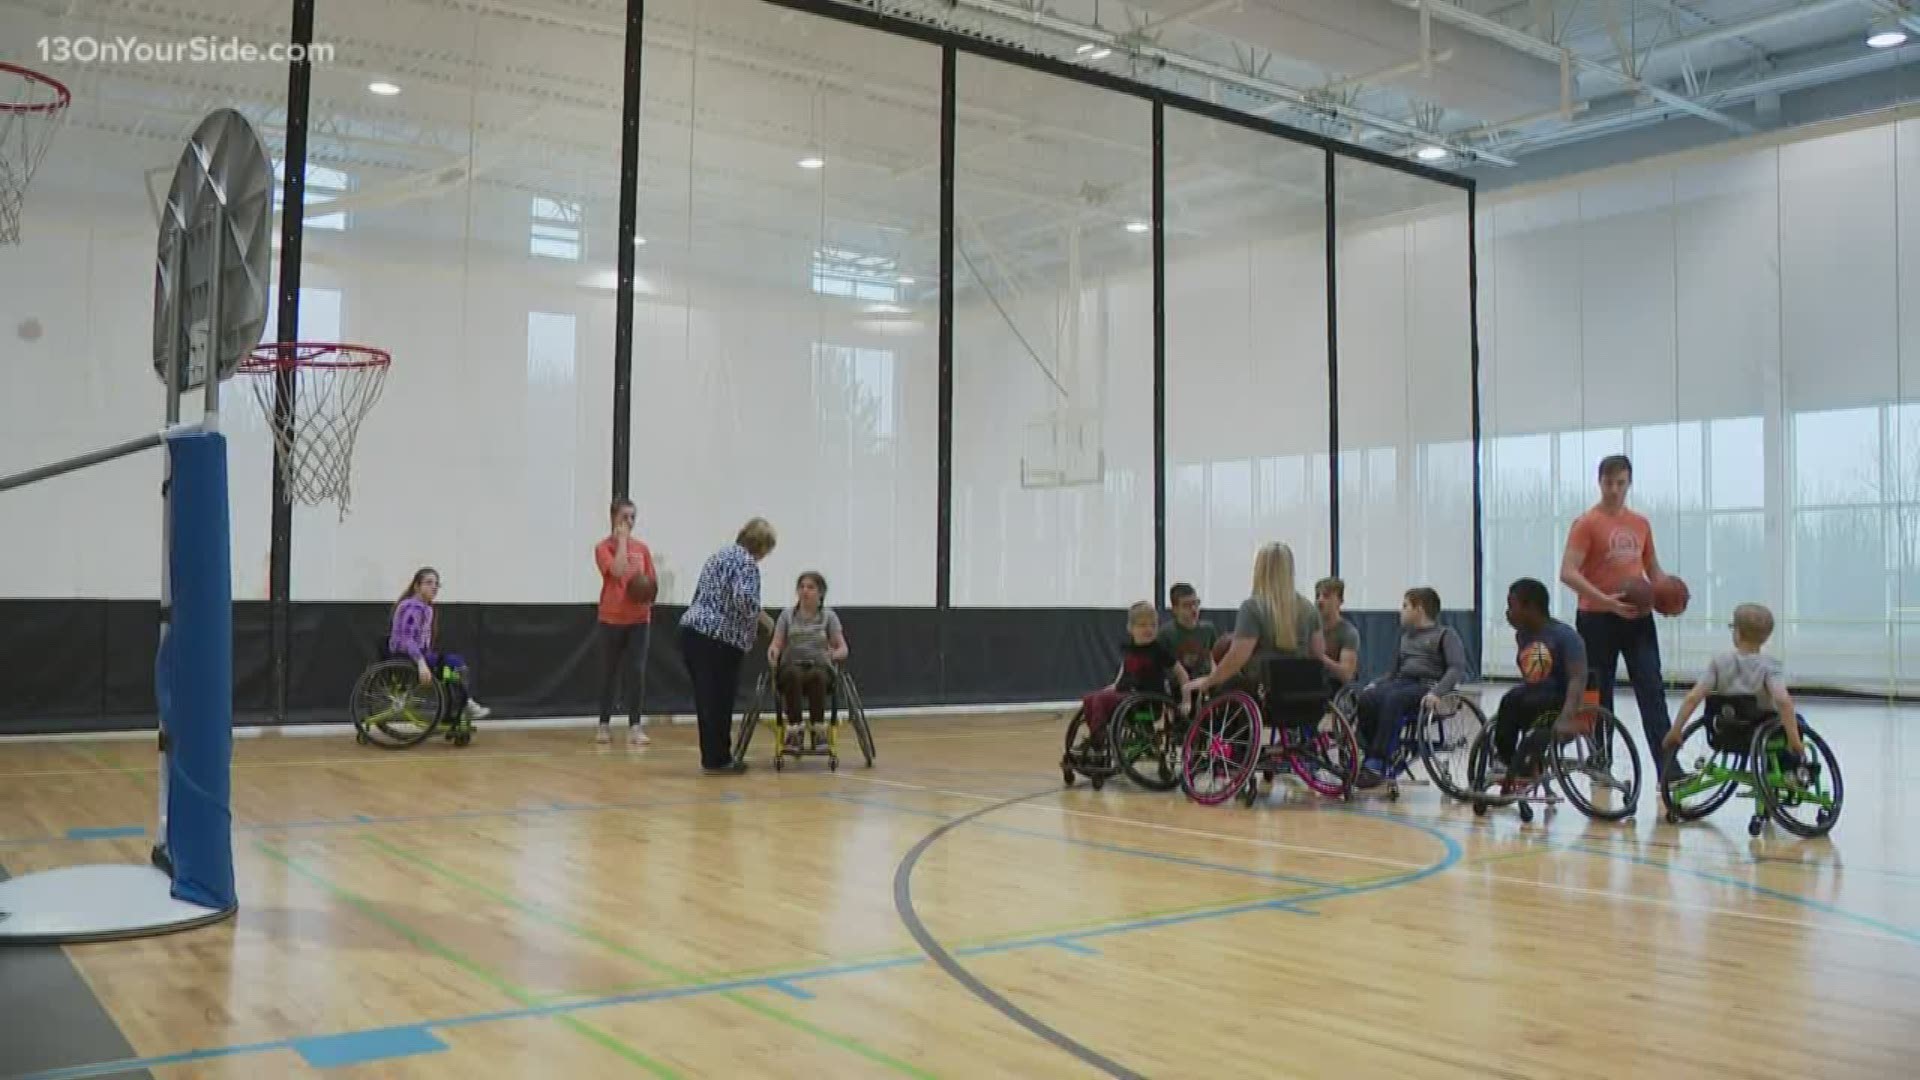 Mary Free Bed has a wheelchair and adaptive sports program for patients and members of the community.